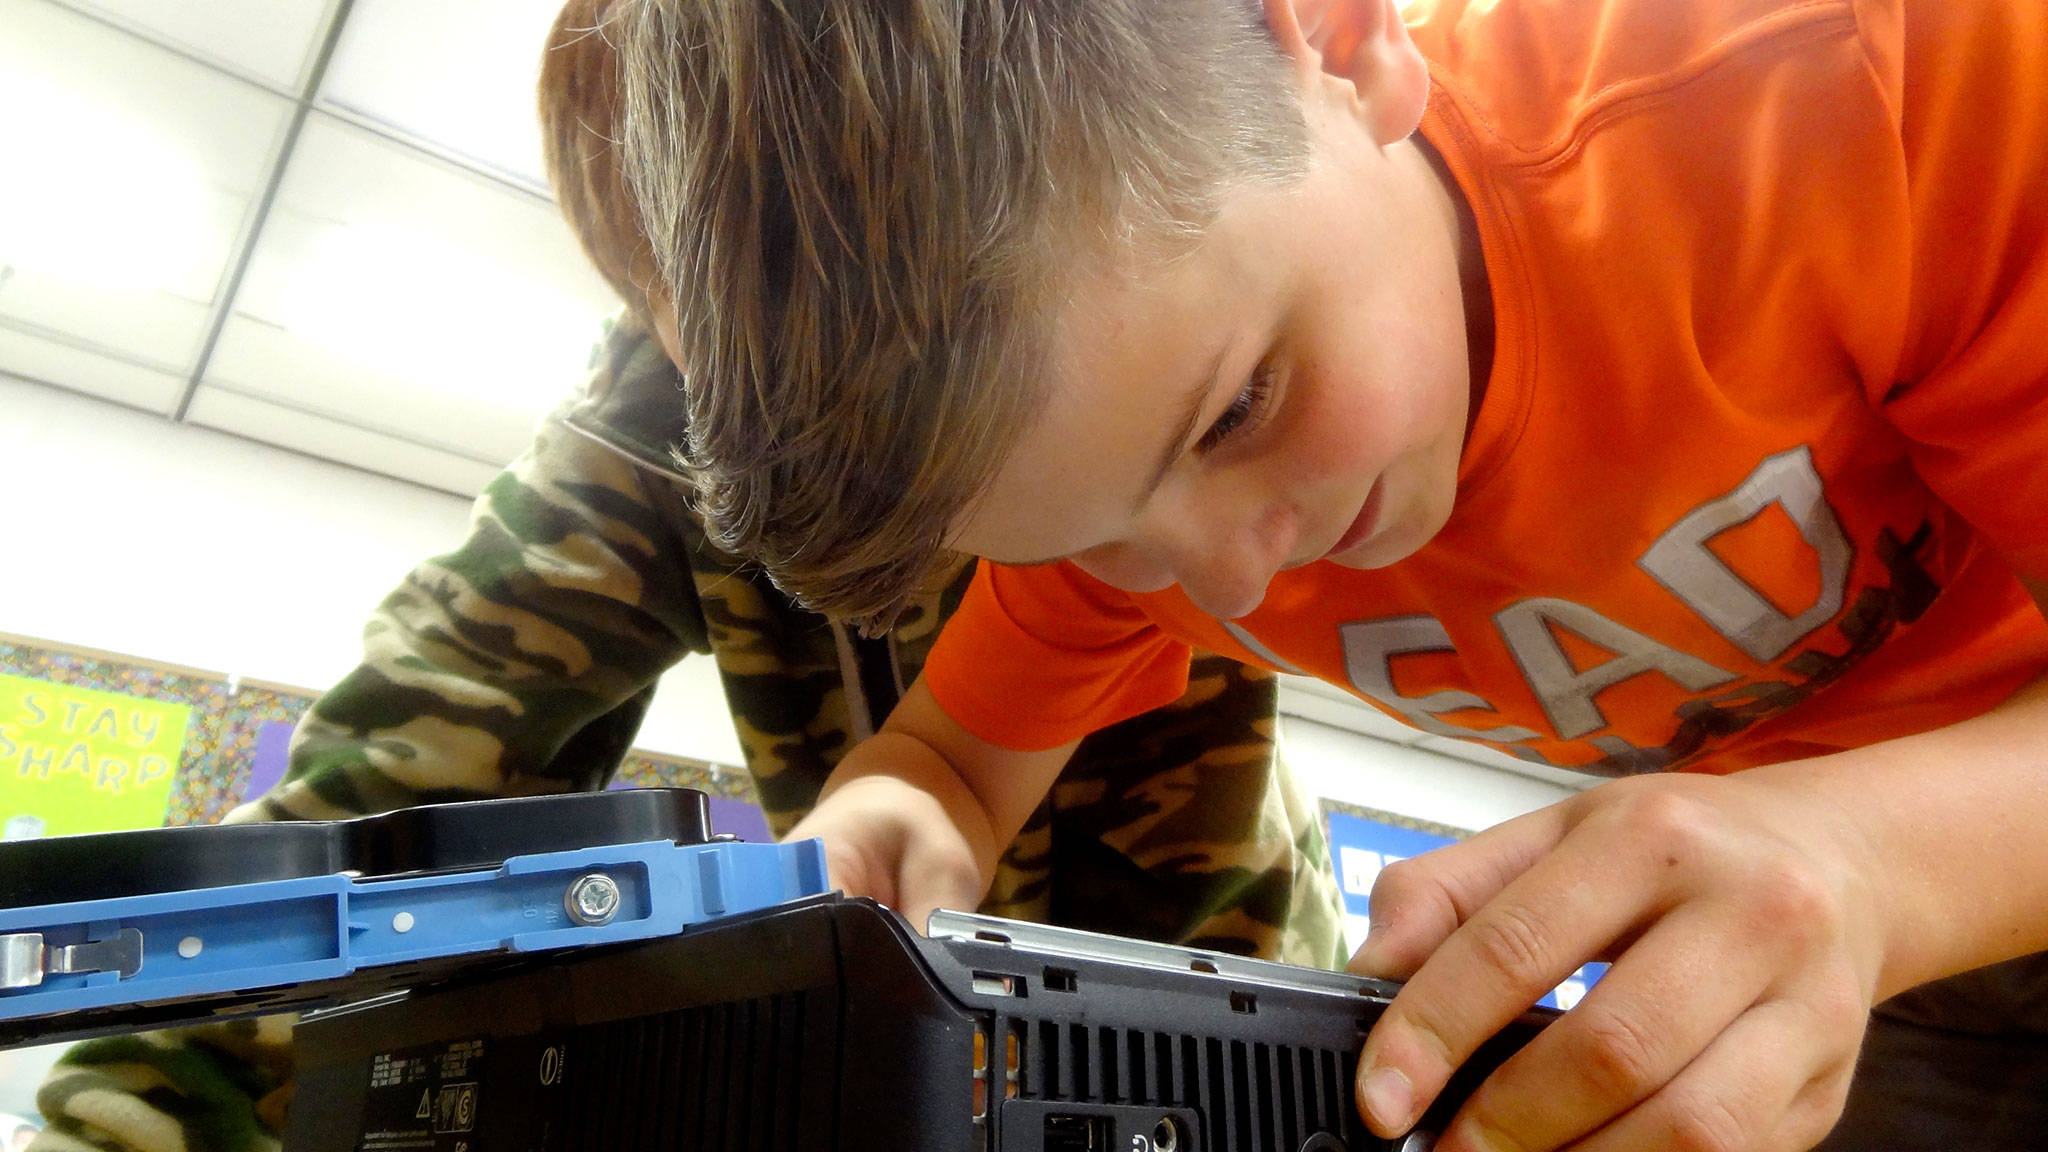 Quentin Bennett works to rebuild a computer in October during Roosevelt Elementary’s Computer Club presented by the Sequim PC Users Group. Photo courtesy of Dick Wolf